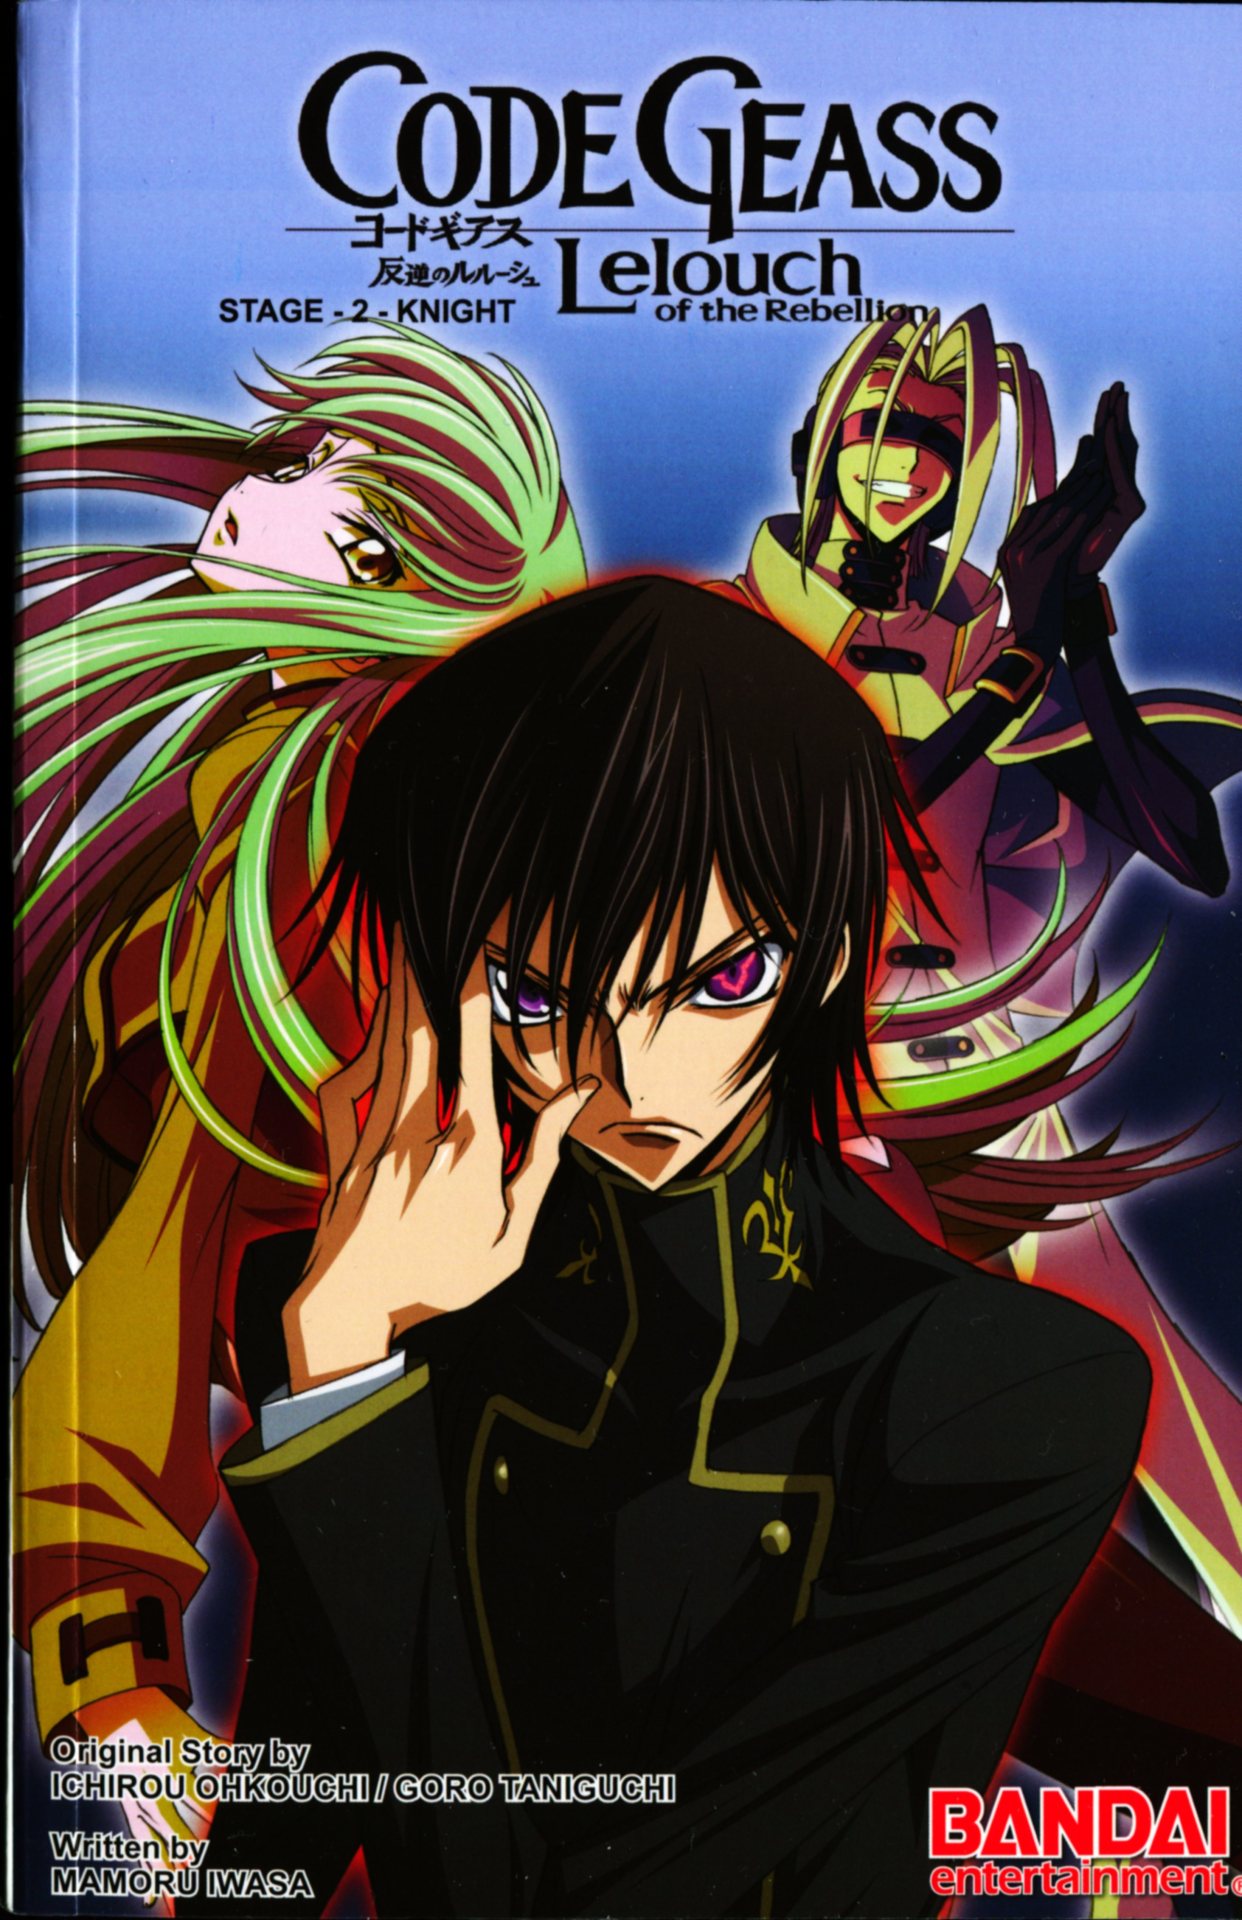 The Code Geass: Lost Stories officially releases in 2 days! : r/CodeGeass